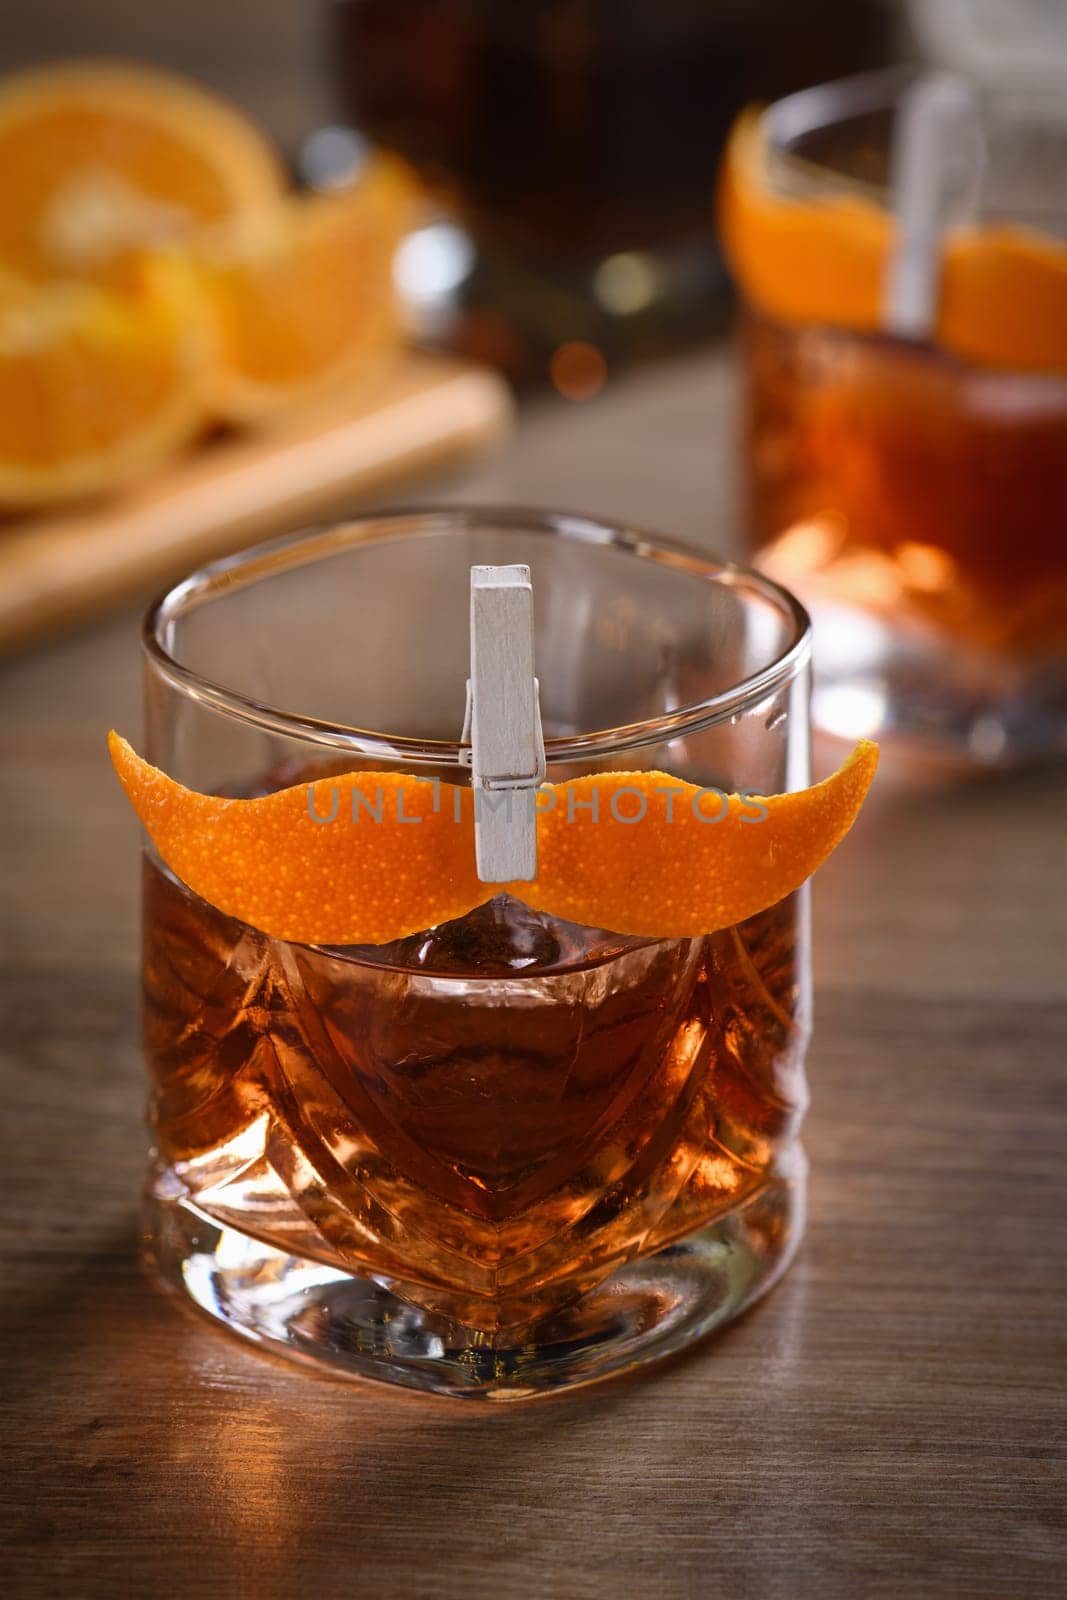 The Sharpie Mustache is a cocktail that's easy to make with equal parts rye whiskey, gin, sweet vermouth and a few drops of bitters, and garnished with a mustache-shaped orange zest